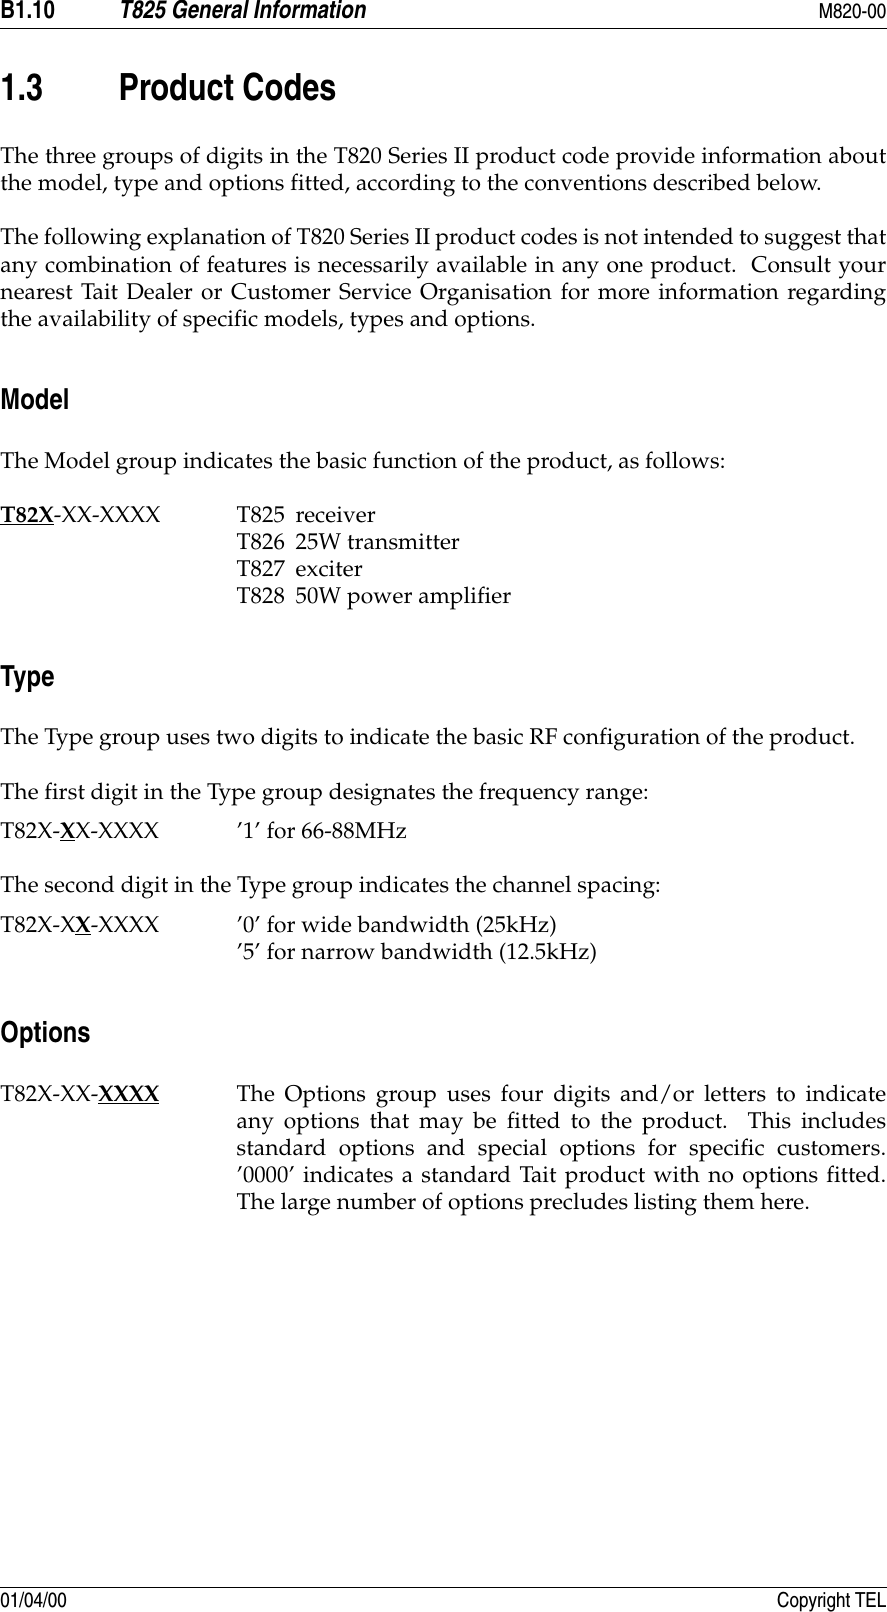 B1.10 T825 General Information M820-0001/04/00 Copyright TEL1.3 Product CodesThe three groups of digits in the T820 Series II product code provide information aboutthe model, type and options fitted, according to the conventions described below.The following explanation of T820 Series II product codes is not intended to suggest thatany combination of features is necessarily available in any one product.  Consult yournearest Tait Dealer or Customer Service Organisation for more information regardingthe availability of specific models, types and options.ModelThe Model group indicates the basic function of the product, as follows:T82X-XX-XXXX T825 receiverT826 25W transmitterT827 exciterT828 50W power amplifierTypeThe Type group uses two digits to indicate the basic RF configuration of the product.The first digit in the Type group designates the frequency range:T82X-XX-XXXX ’1’ for 66-88MHzThe second digit in the Type group indicates the channel spacing:T82X-XX-XXXX ’0’ for wide bandwidth (25kHz)’5’ for narrow bandwidth (12.5kHz)OptionsT82X-XX-XXXX The Options group uses four digits and/or letters to indicateany options that may be fitted to the product.  This includesstandard options and special options for specific customers.’0000’ indicates a standard Tait product with no options fitted.The large number of options precludes listing them here.